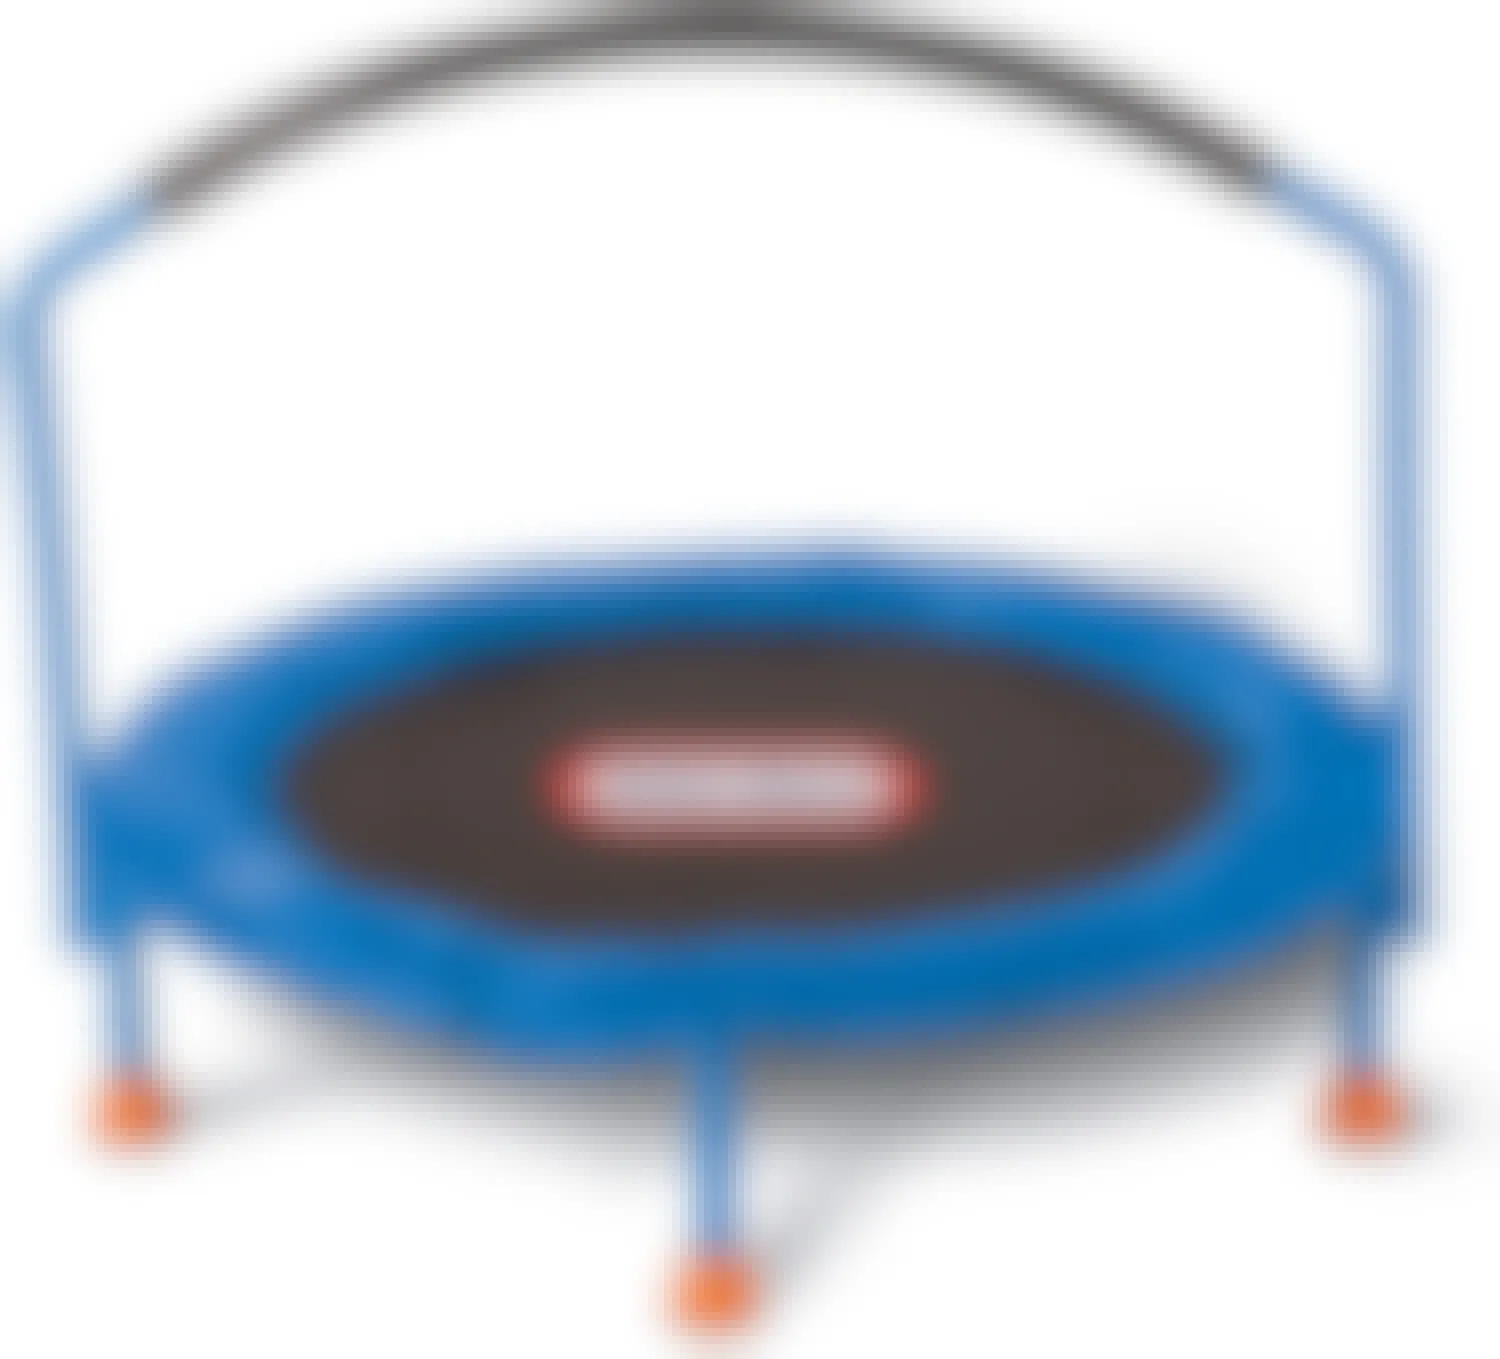 A Little Tikes 3' Trampoline on a white background.